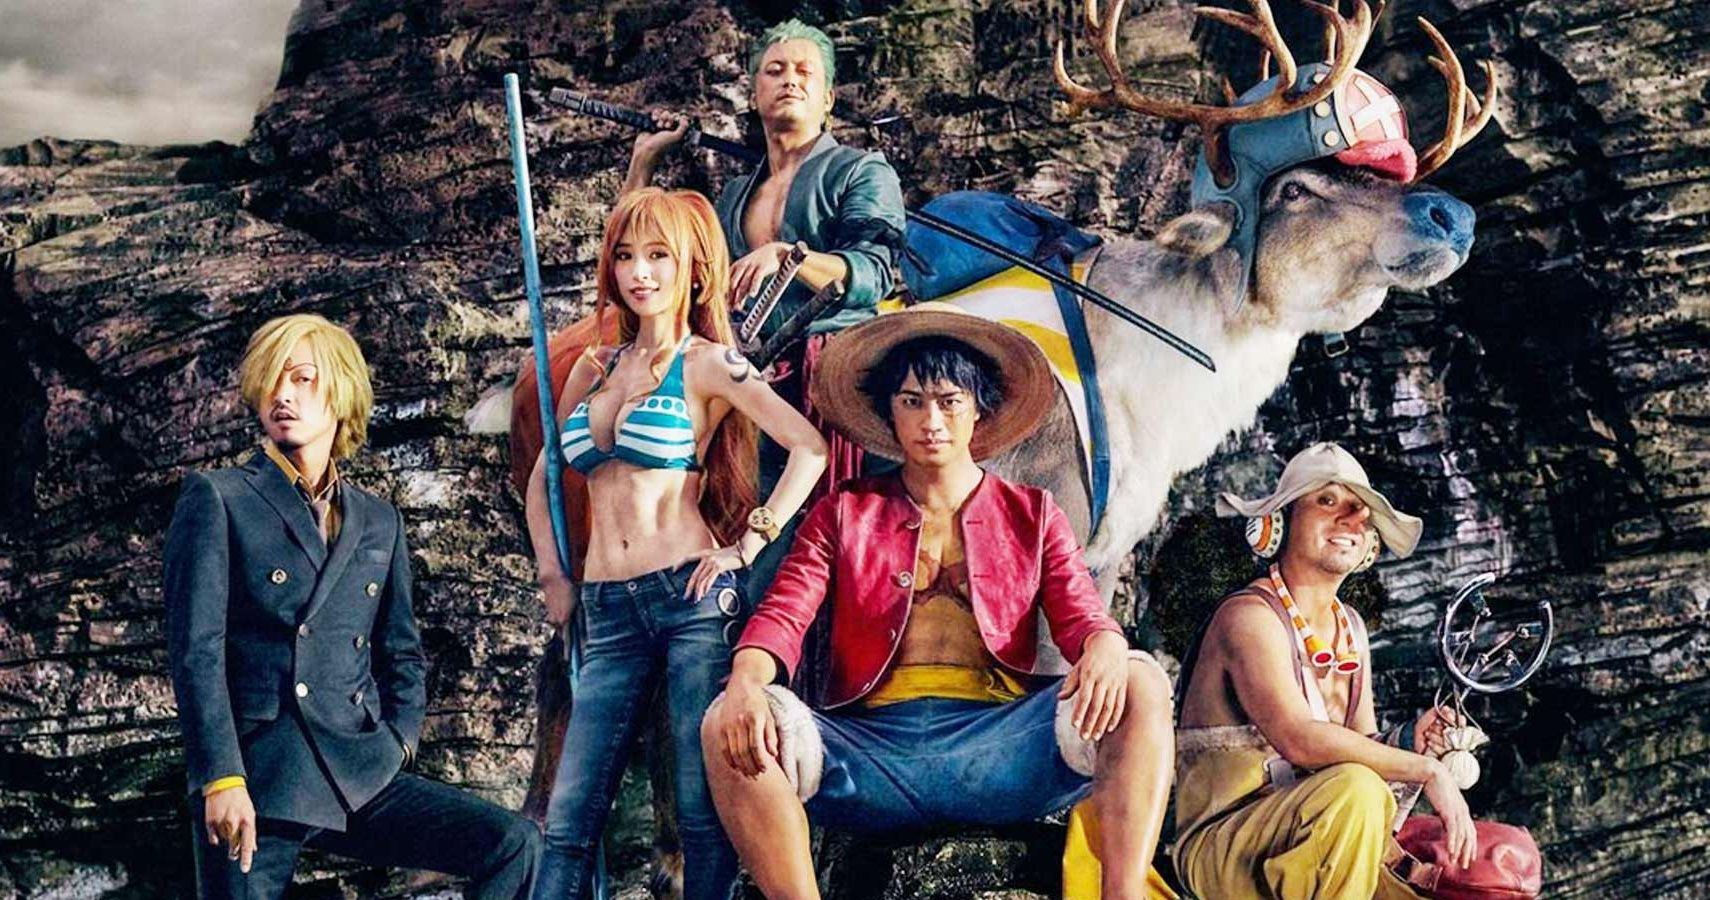 Why Is The One Piece Live Action So Popular